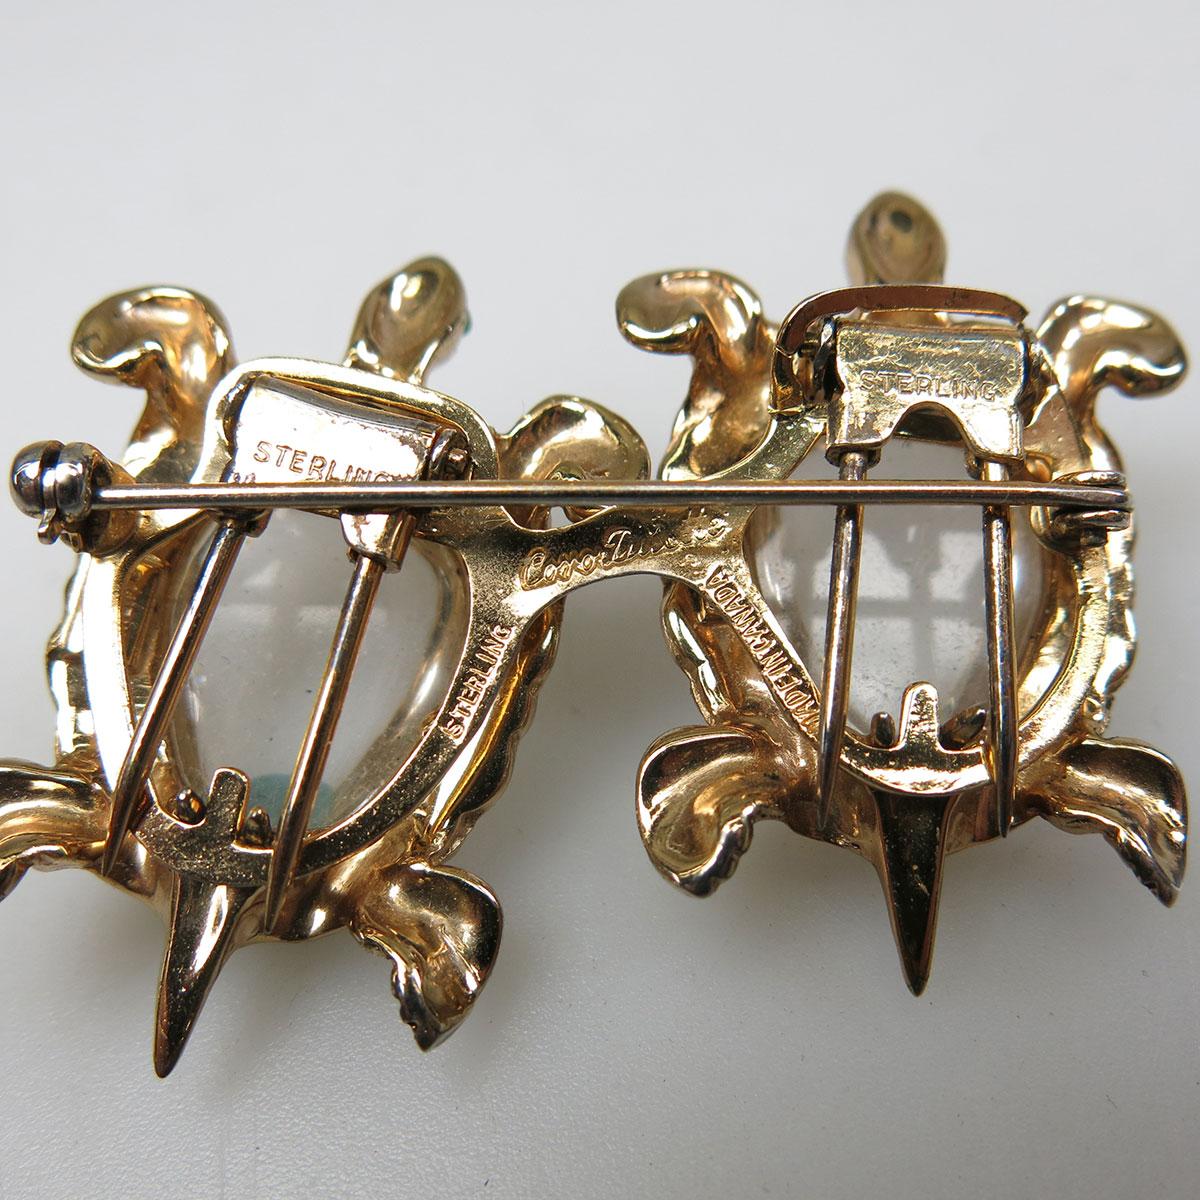 Coro Canadian Sterling Silver Gilt Duette Pin